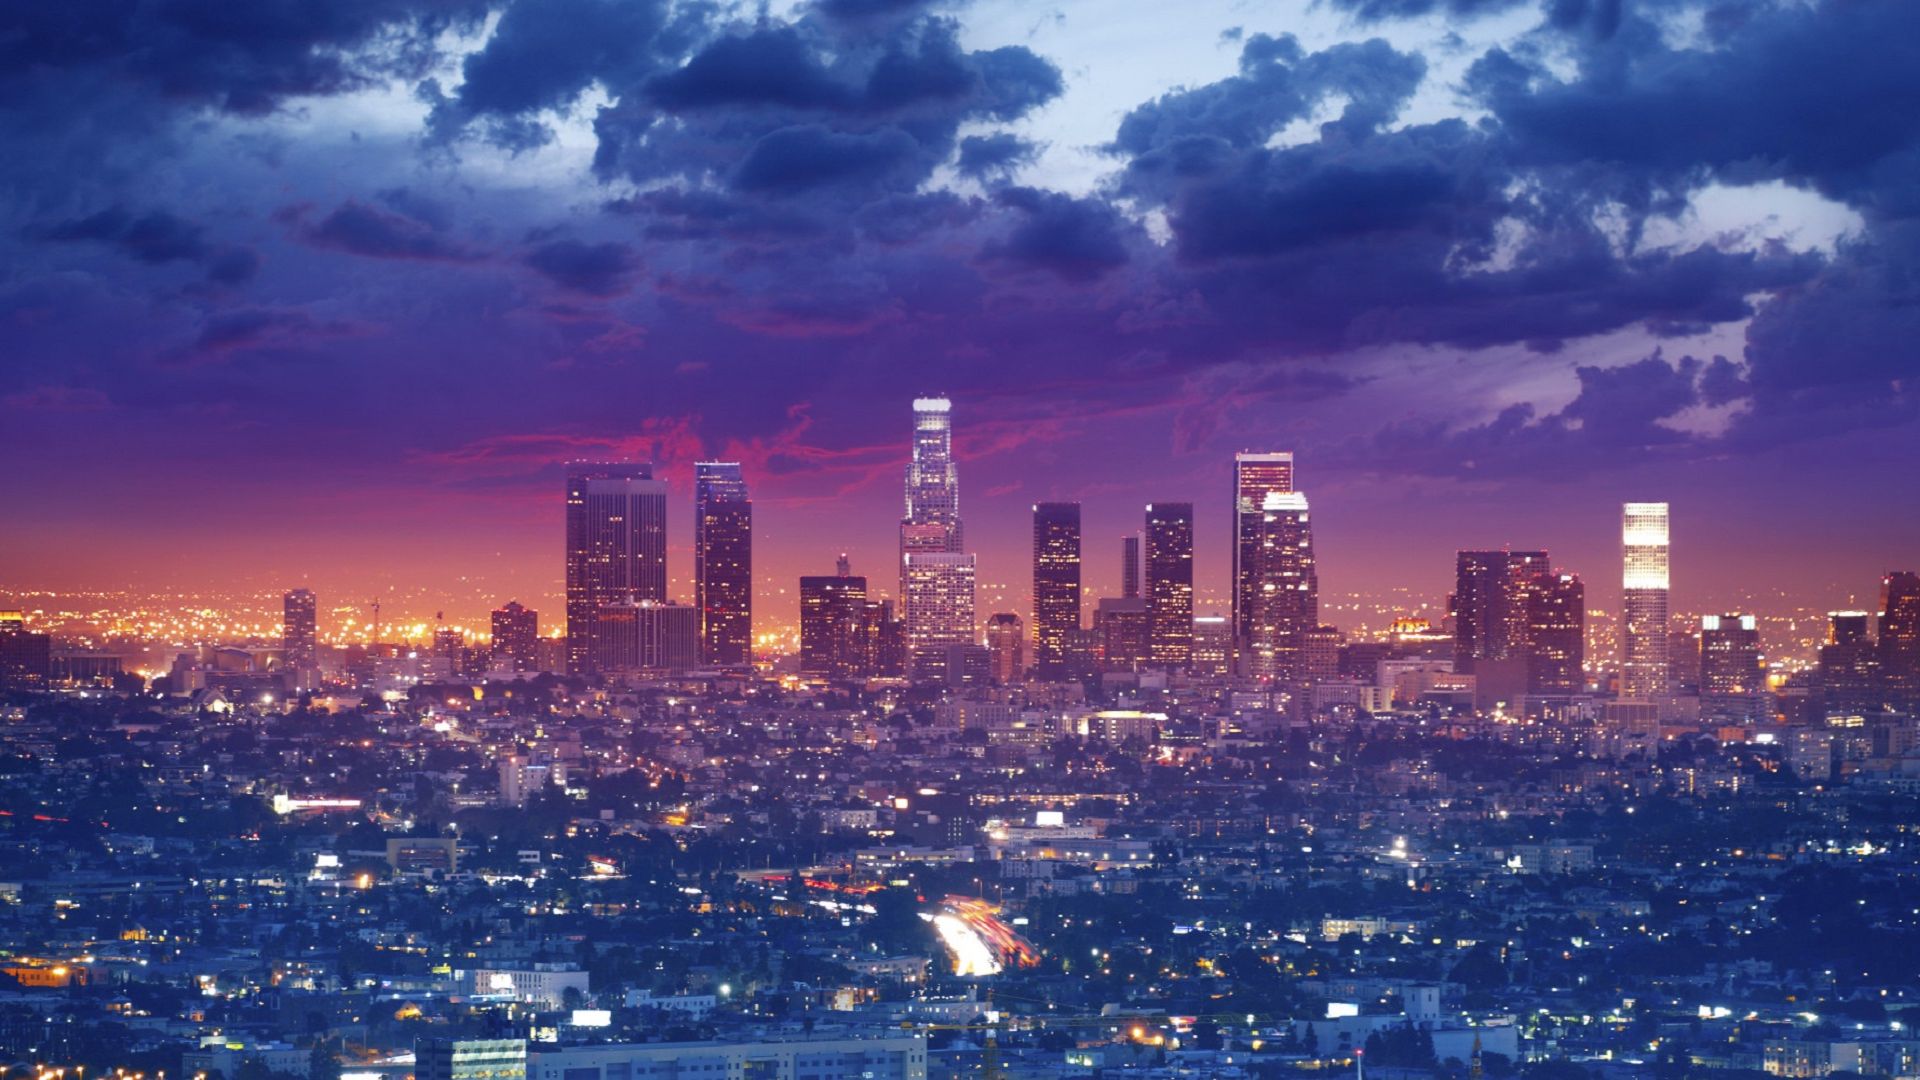 Los Angeles Aesthetic Wallpapers